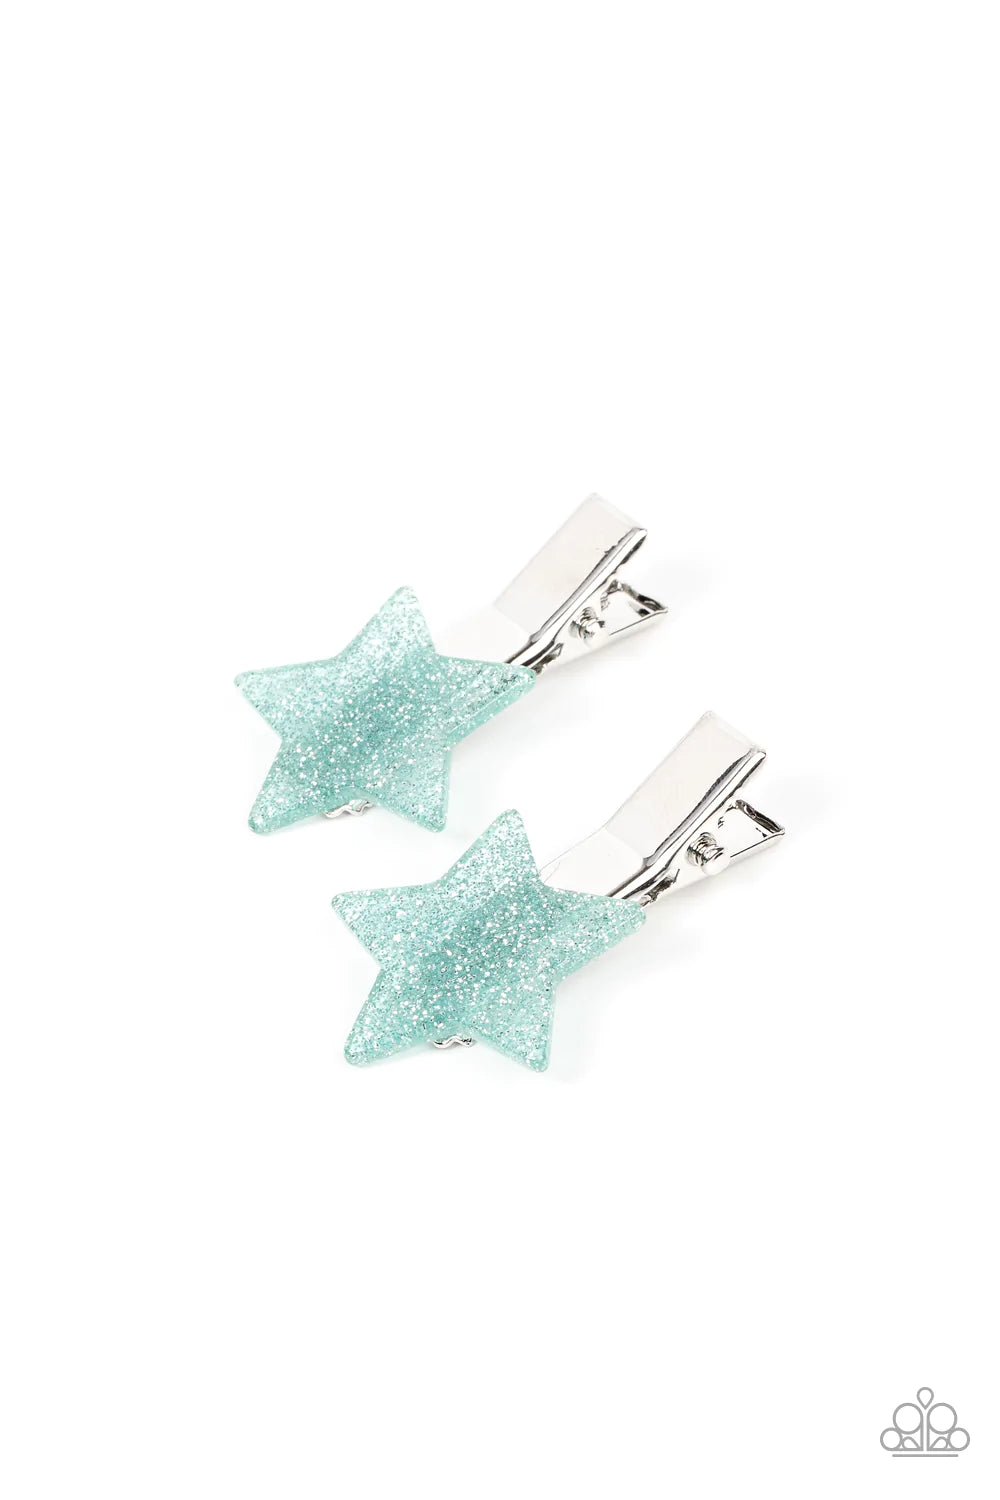 Paparazzi Accessories Sparkly Star Chart - Blue Sprinkled in glitter, a pair of blue acrylic stars pull back the hair for a stellar fashion. Features standard hair clips on the back. Sold as one pair of hair clips. Hair Pins